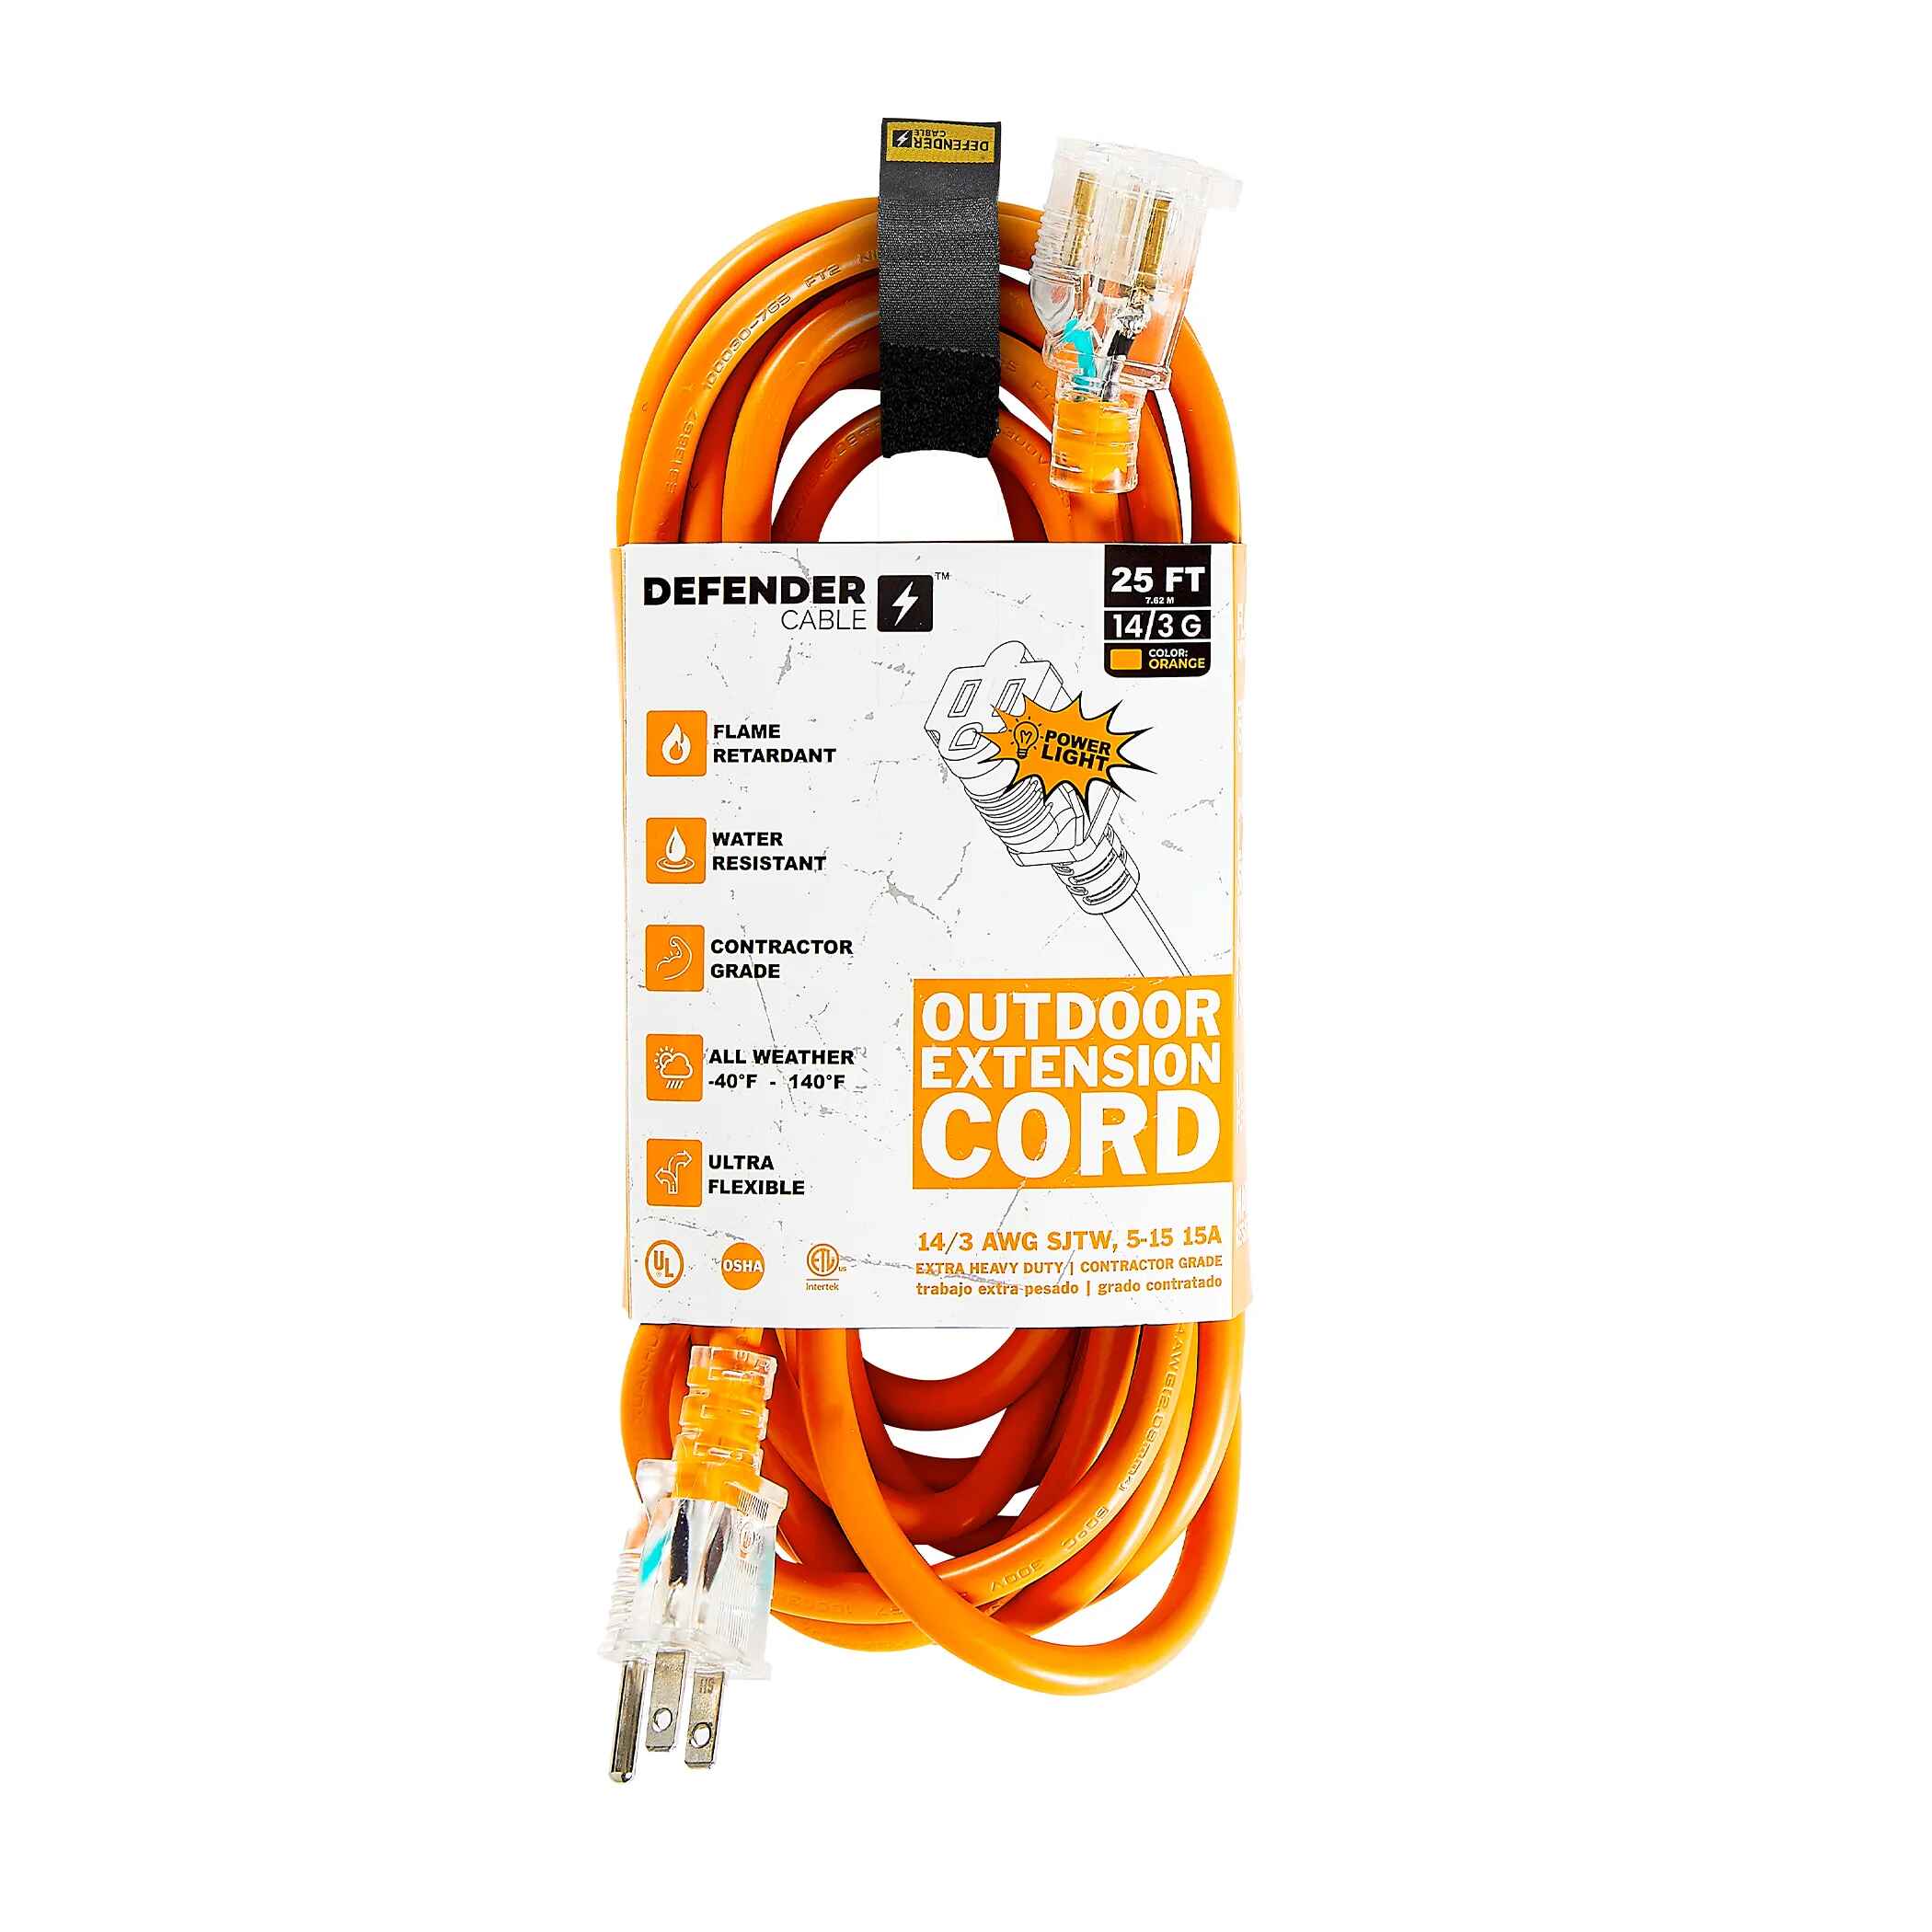 A Guide to Extension Cord Safety - FullScale Home Inspection